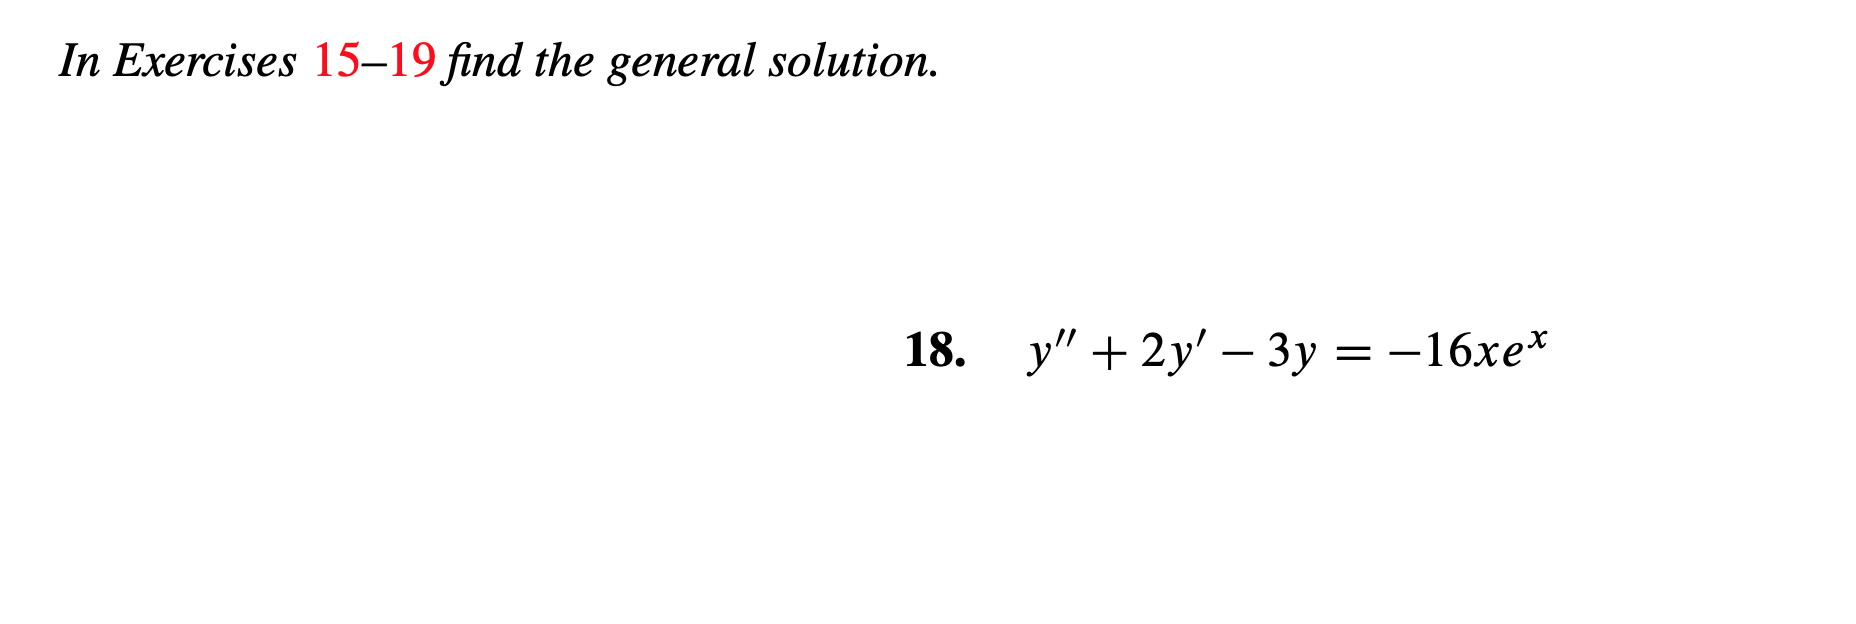 In Exercises 15-19 find the general solution.
у"+2y' - Зу %3D
-16xe
